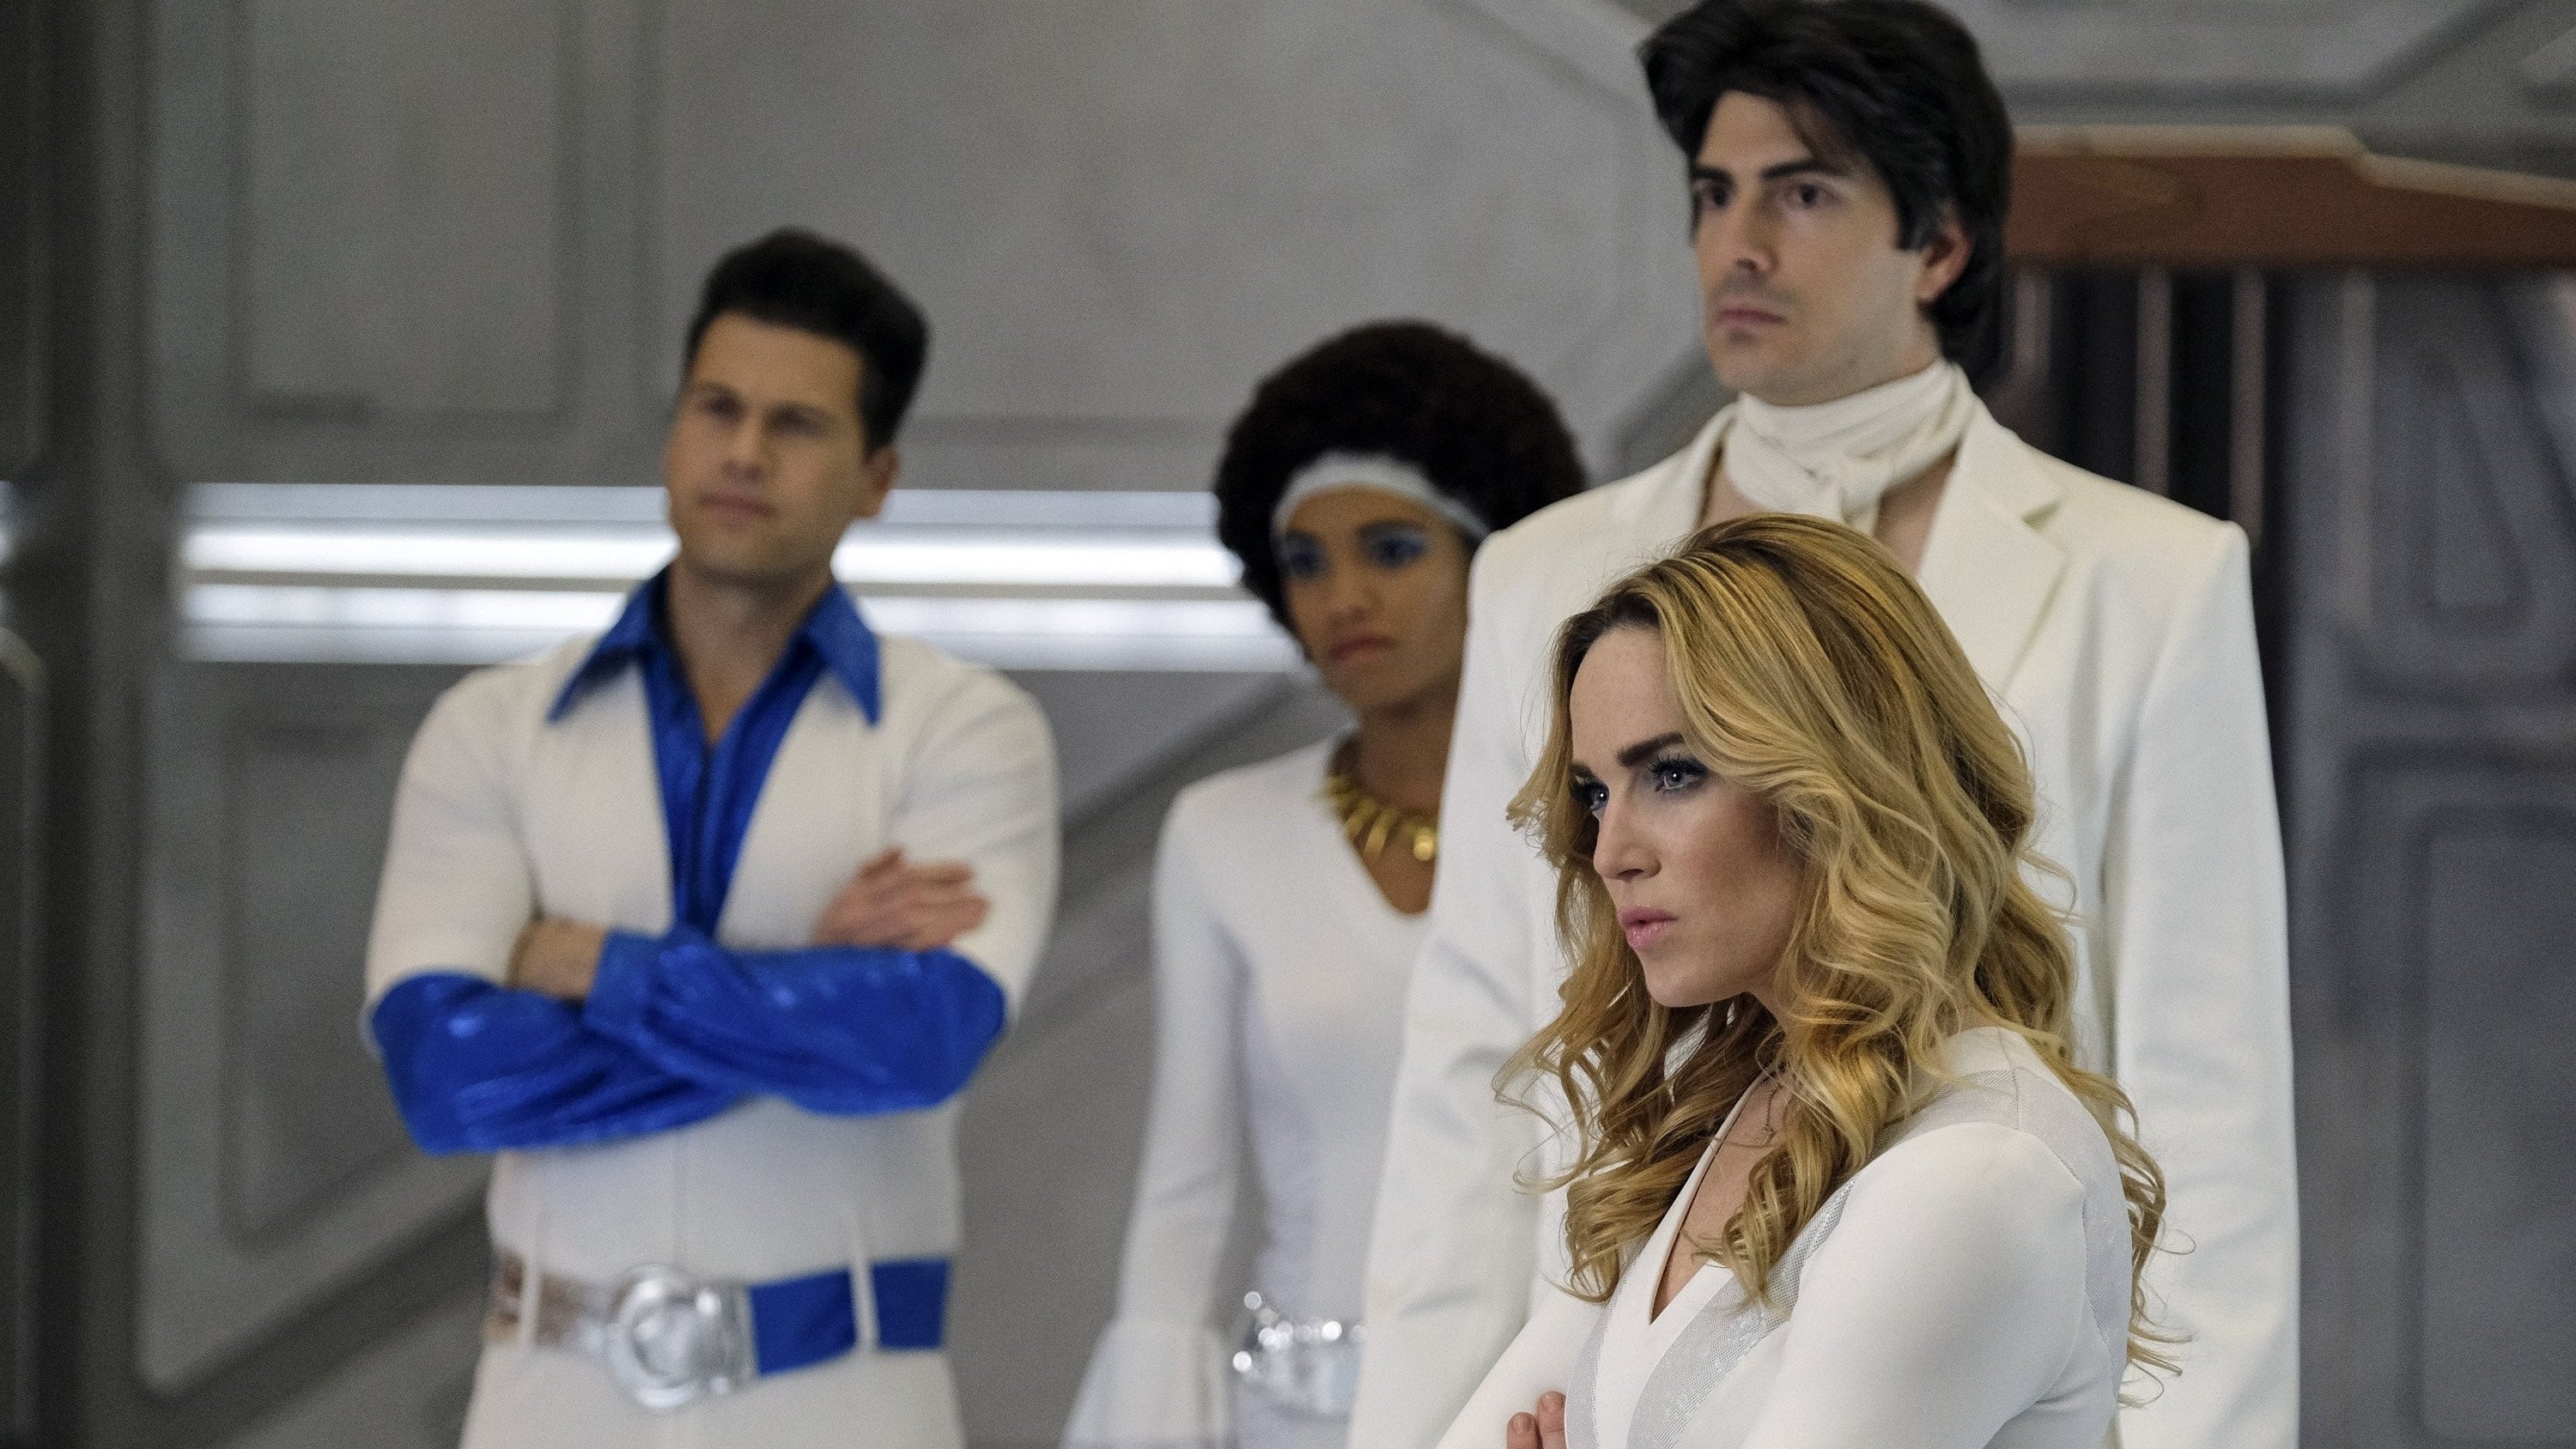 Image DC Legends of Tomorrow (2016) 1